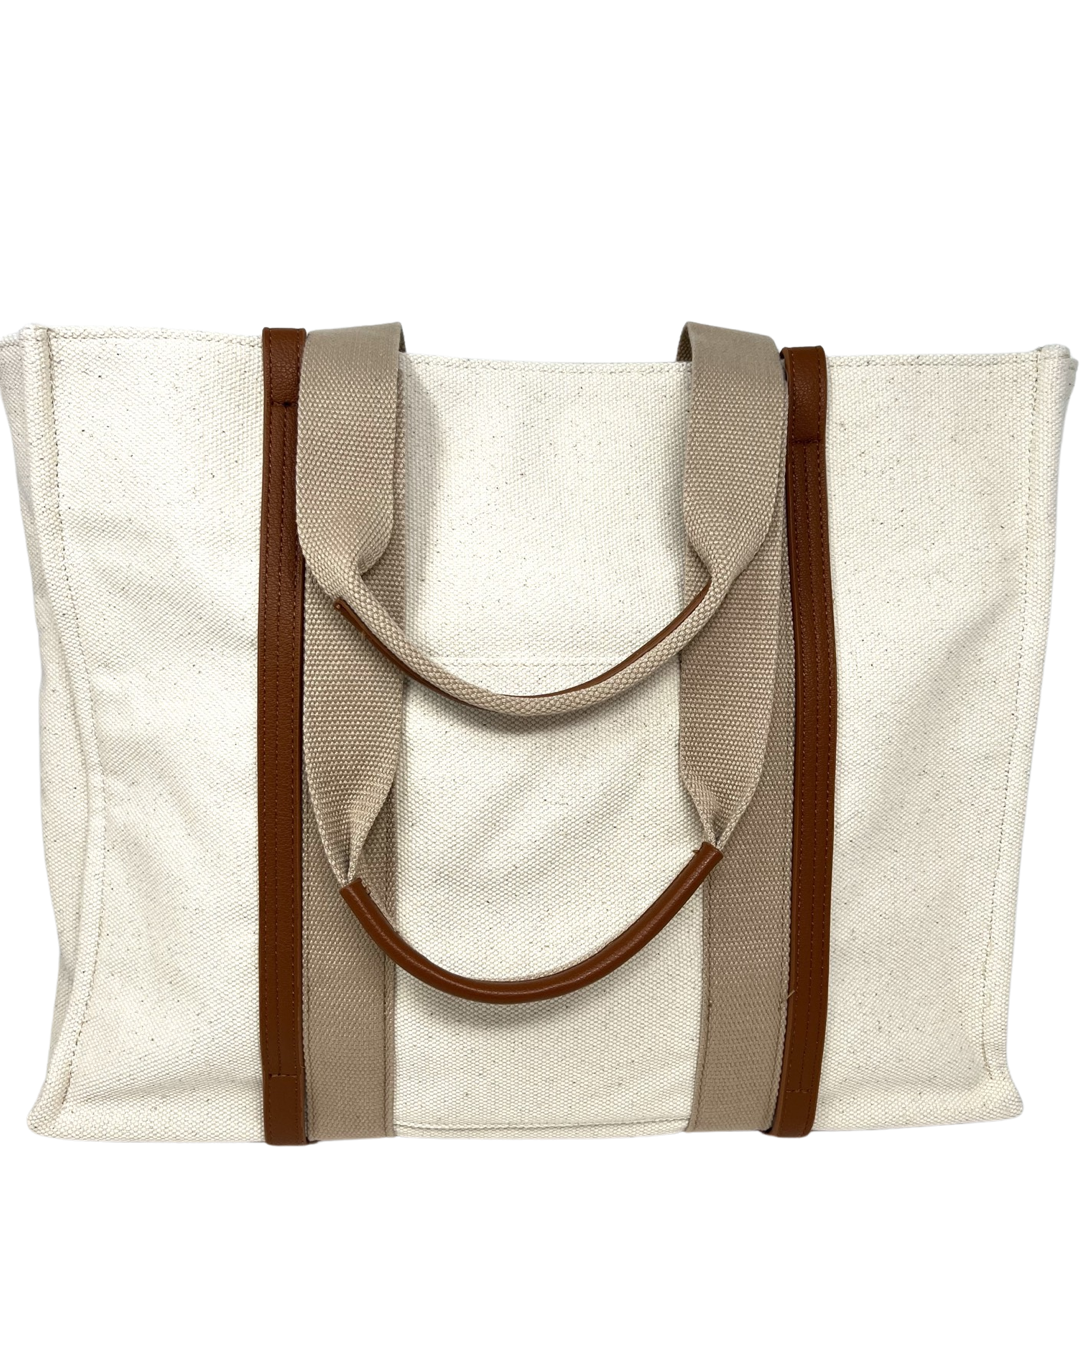 Chlo Chlo Canvas and Leather Tote in Cognac